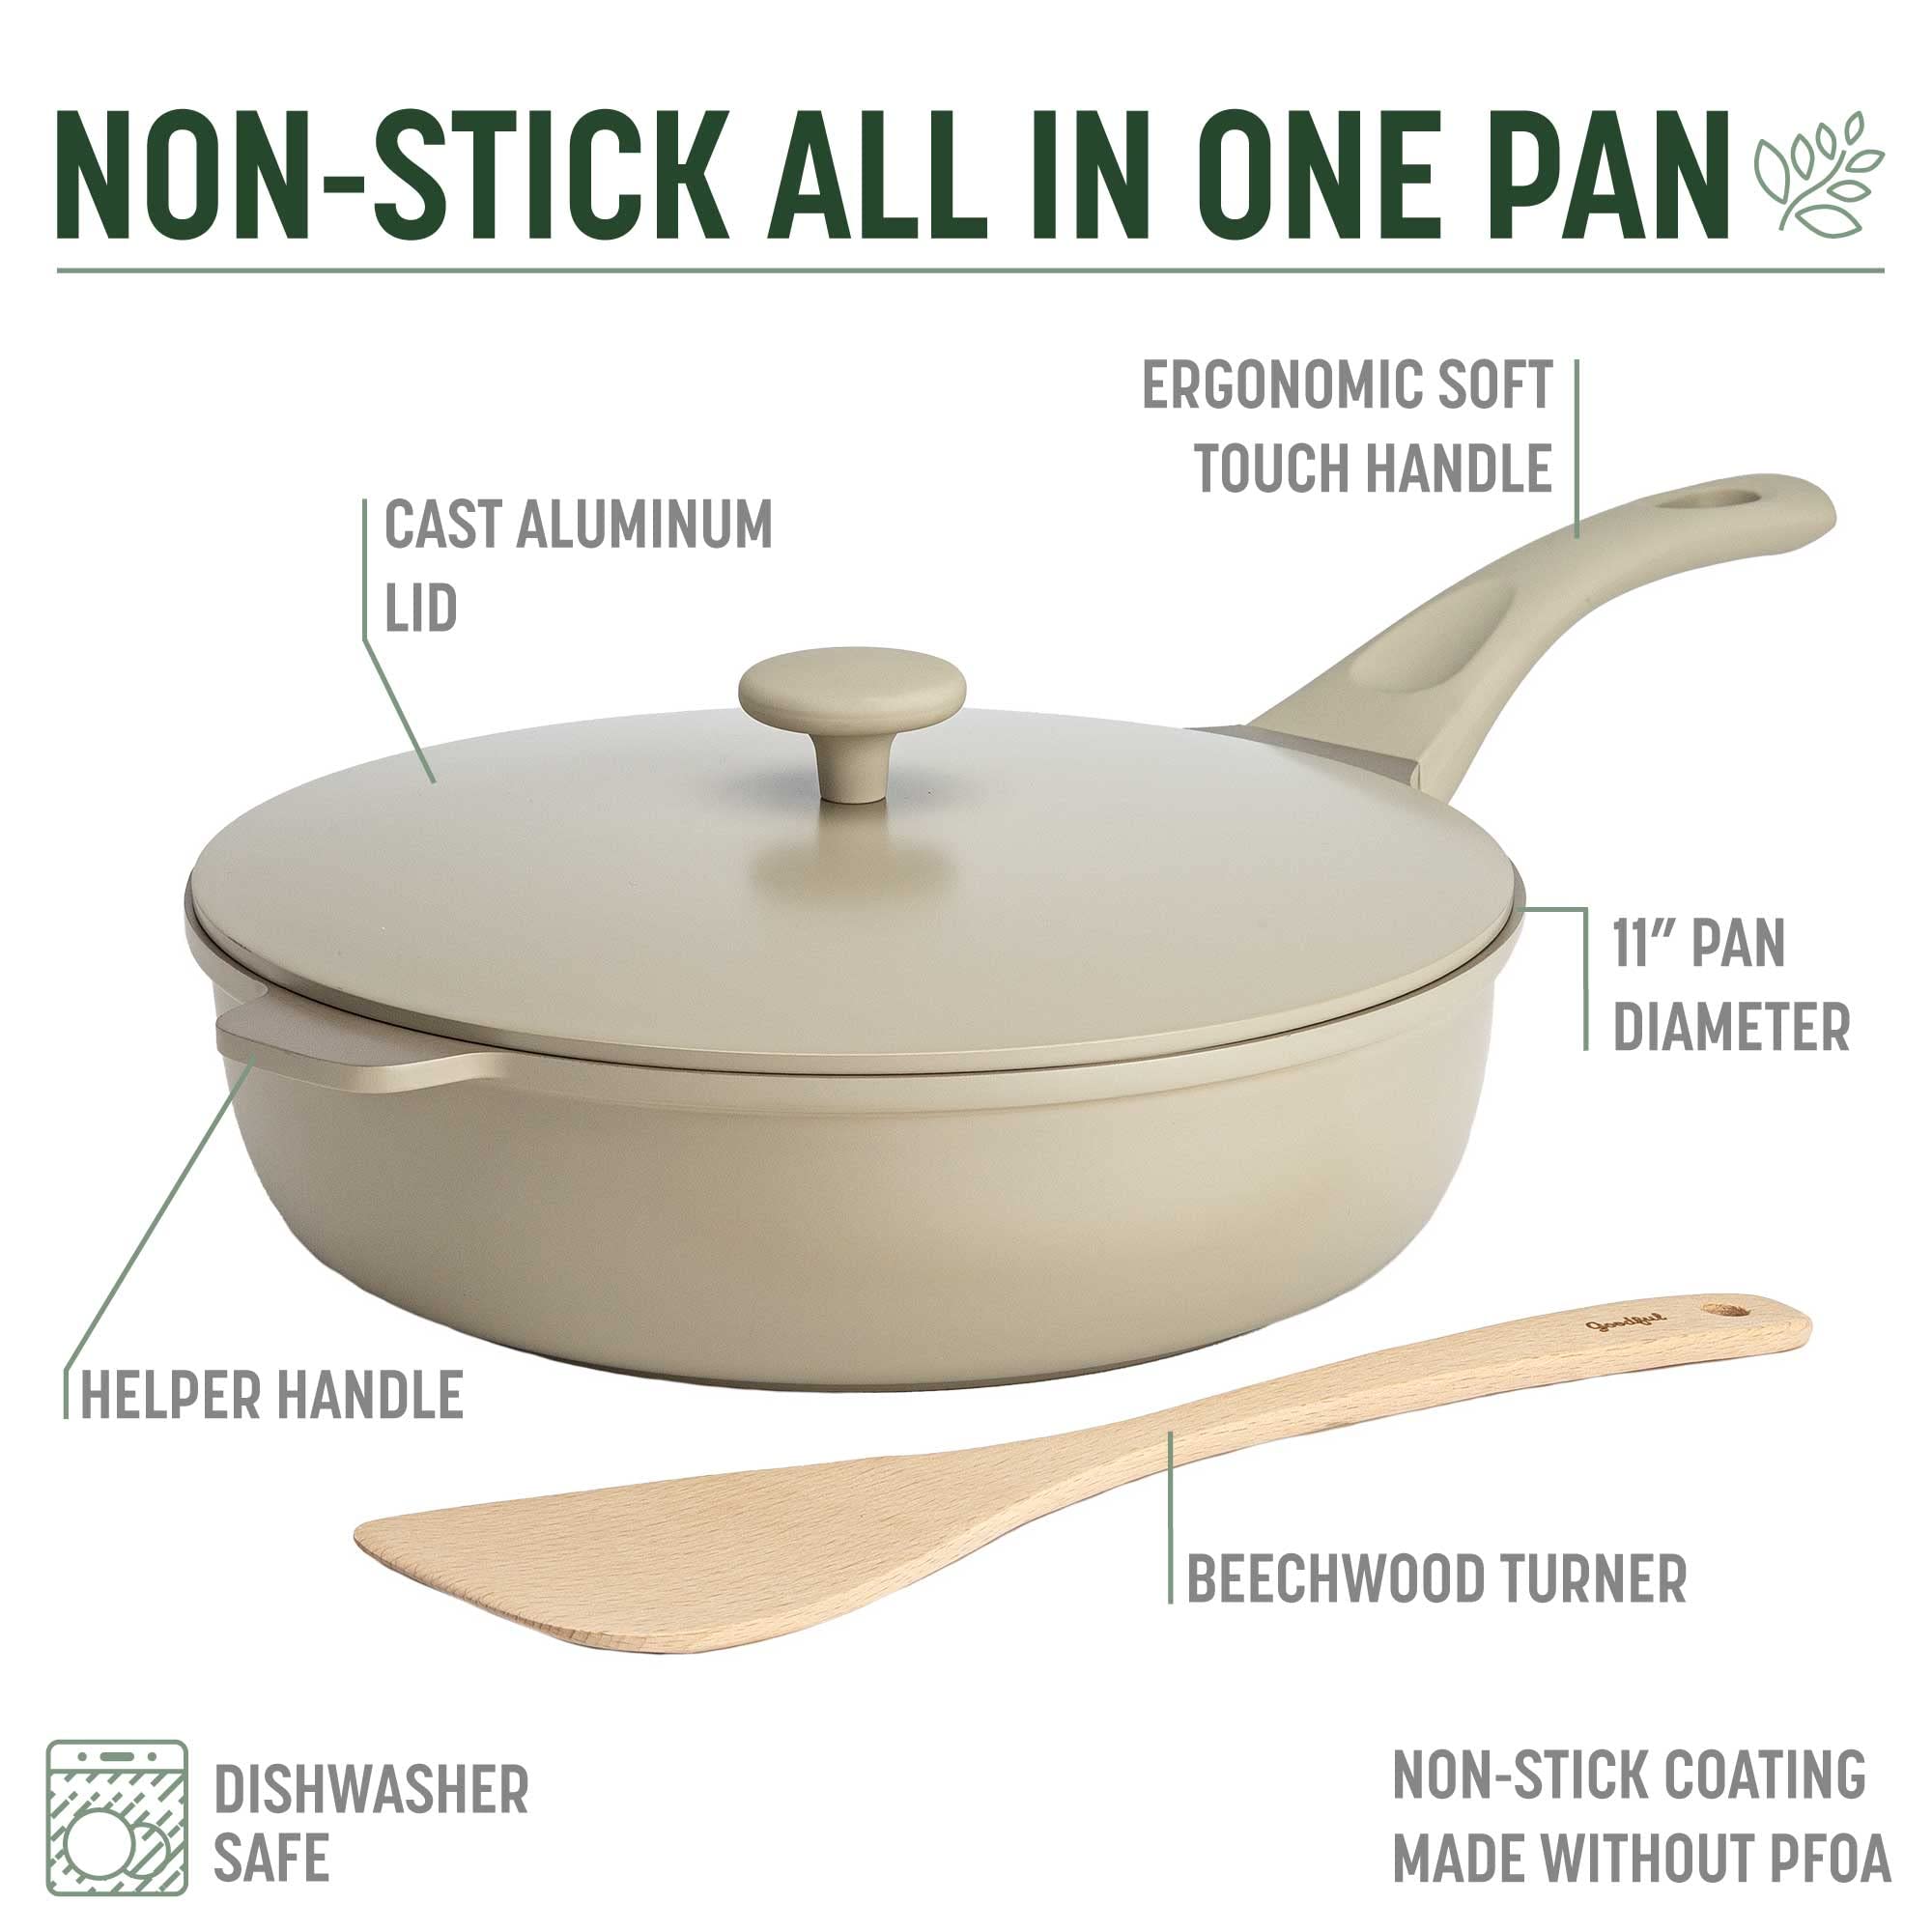 Goodful All-in-One Pan, Multilayer Nonstick, High-Performance Cast Construction, Multipurpose Design Replaces Multiple Pots and Pans, Dishwasher Safe Cookware, 11-Inch, 4.4-Quart Capacity, Linen